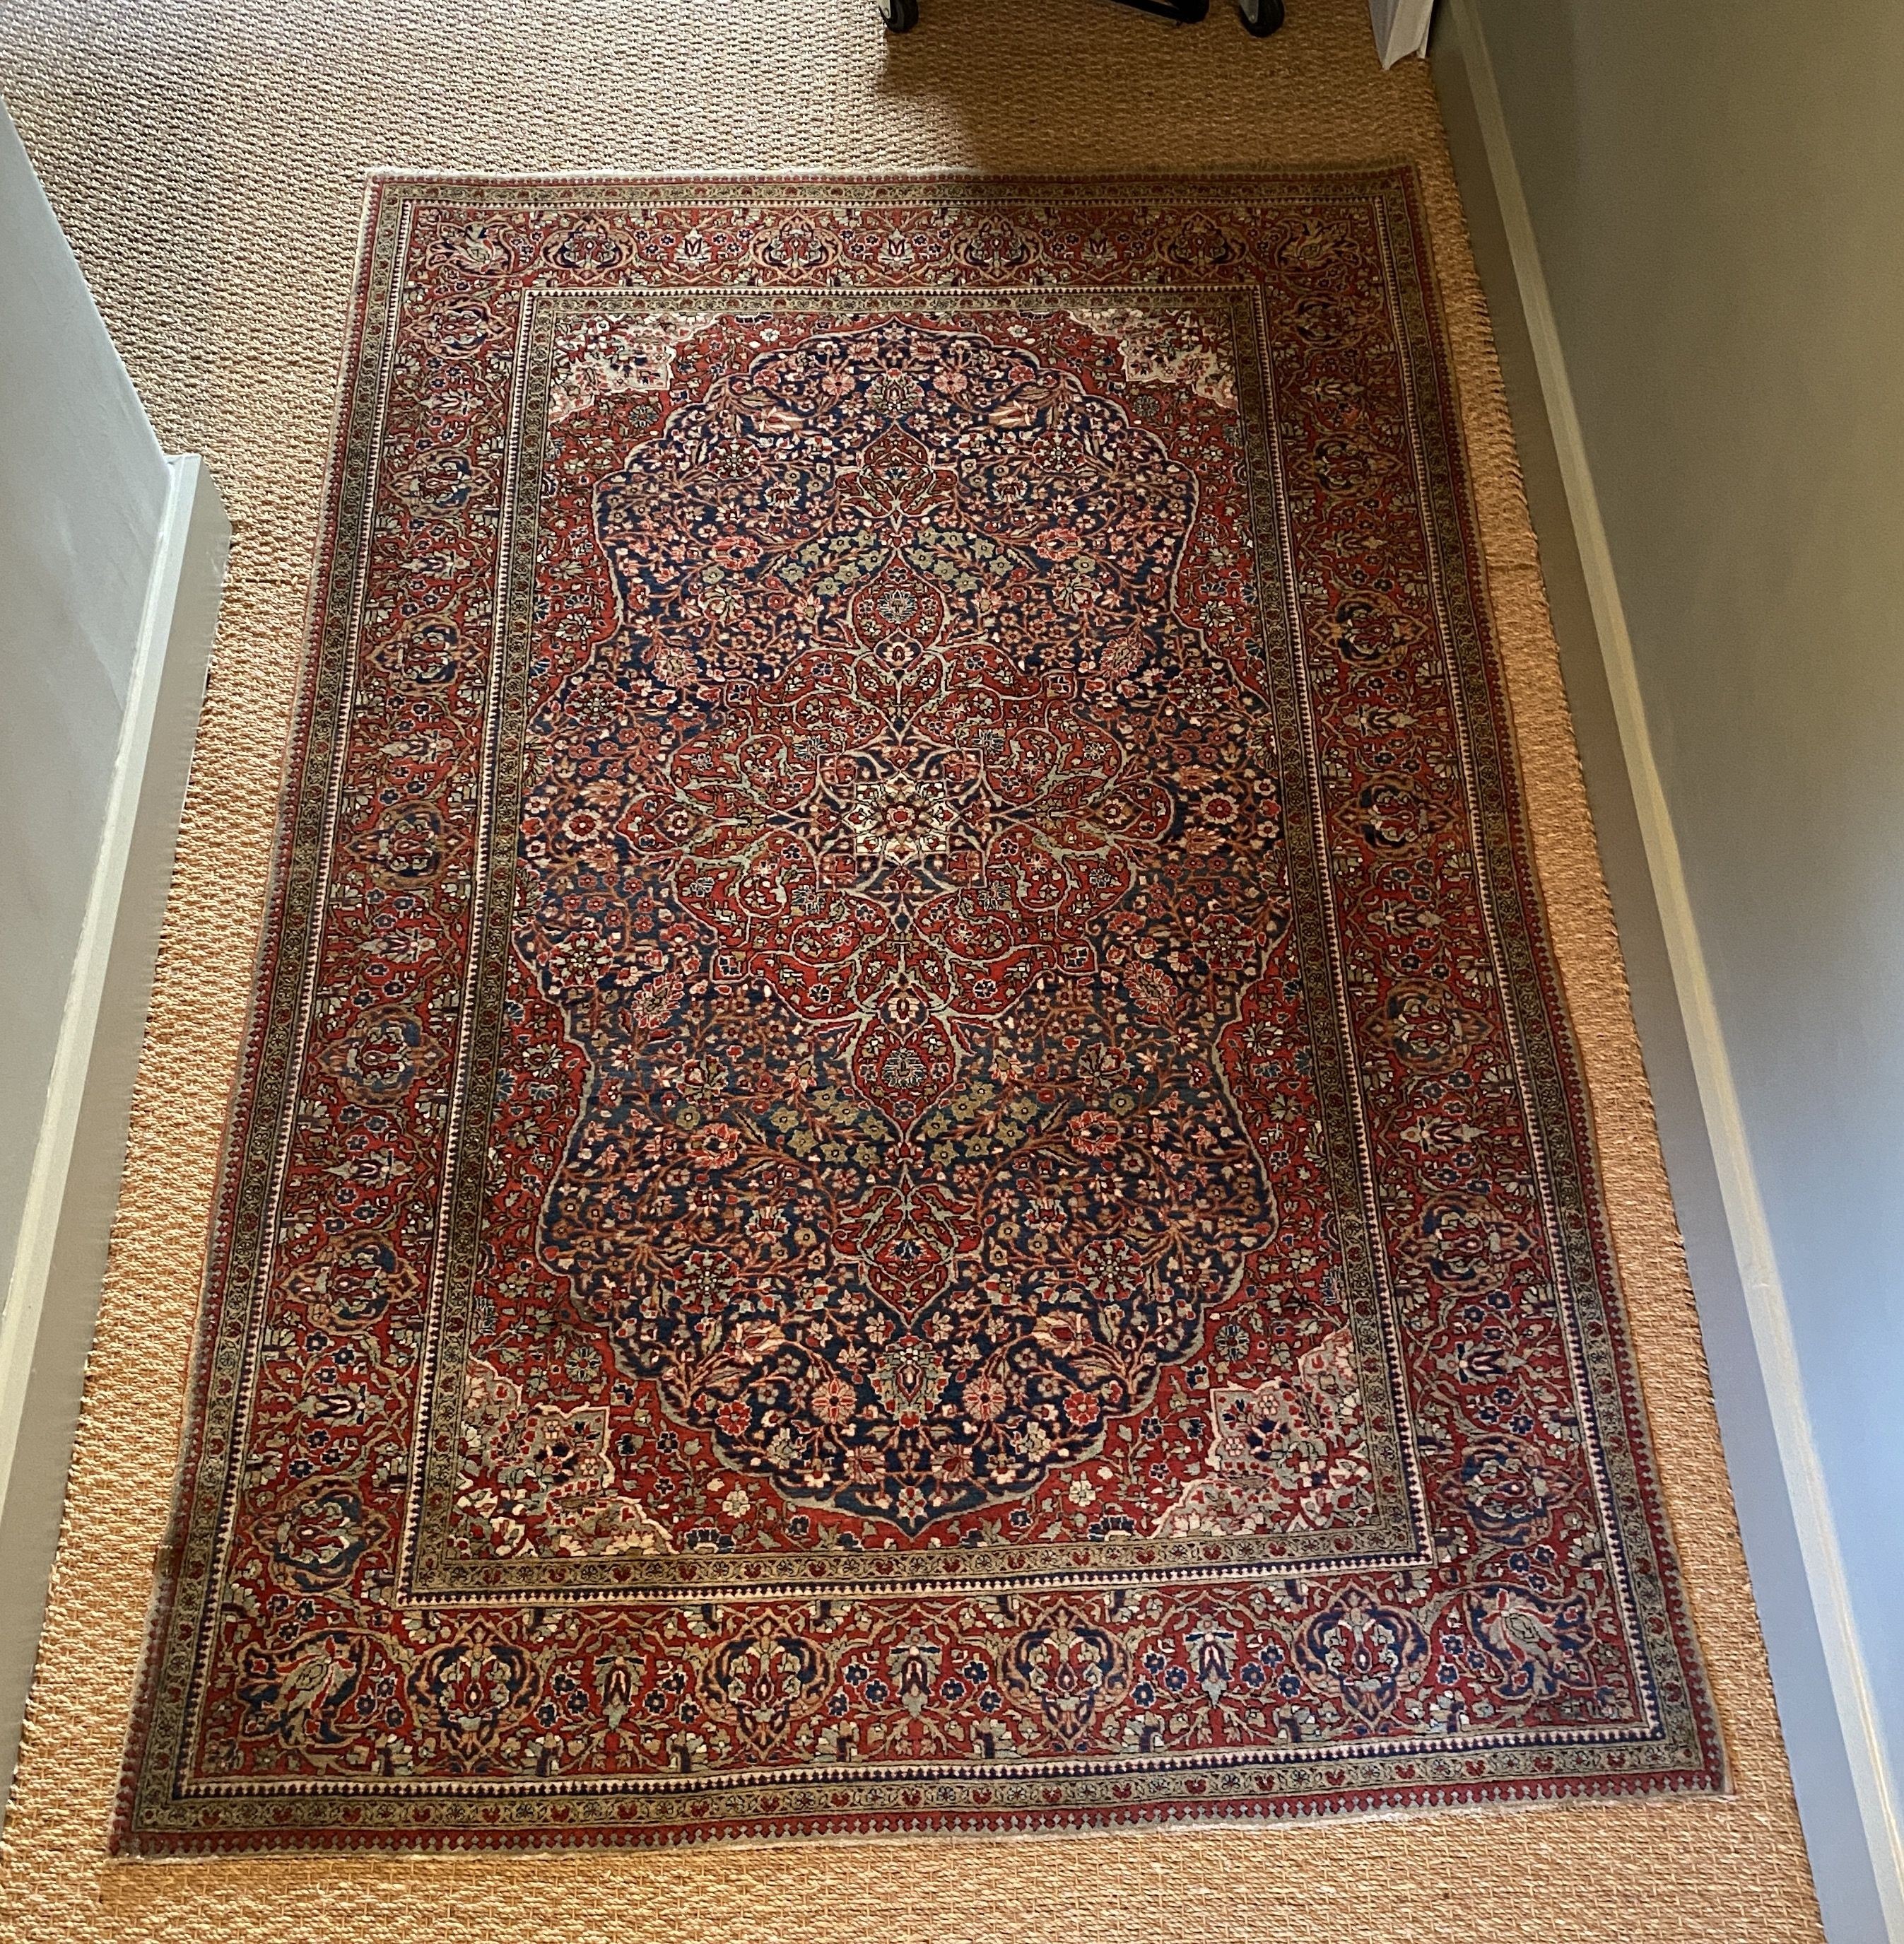 A fine Isphahan red ground rug, with central floral medallion, multi-bordered, 197 x 129cm